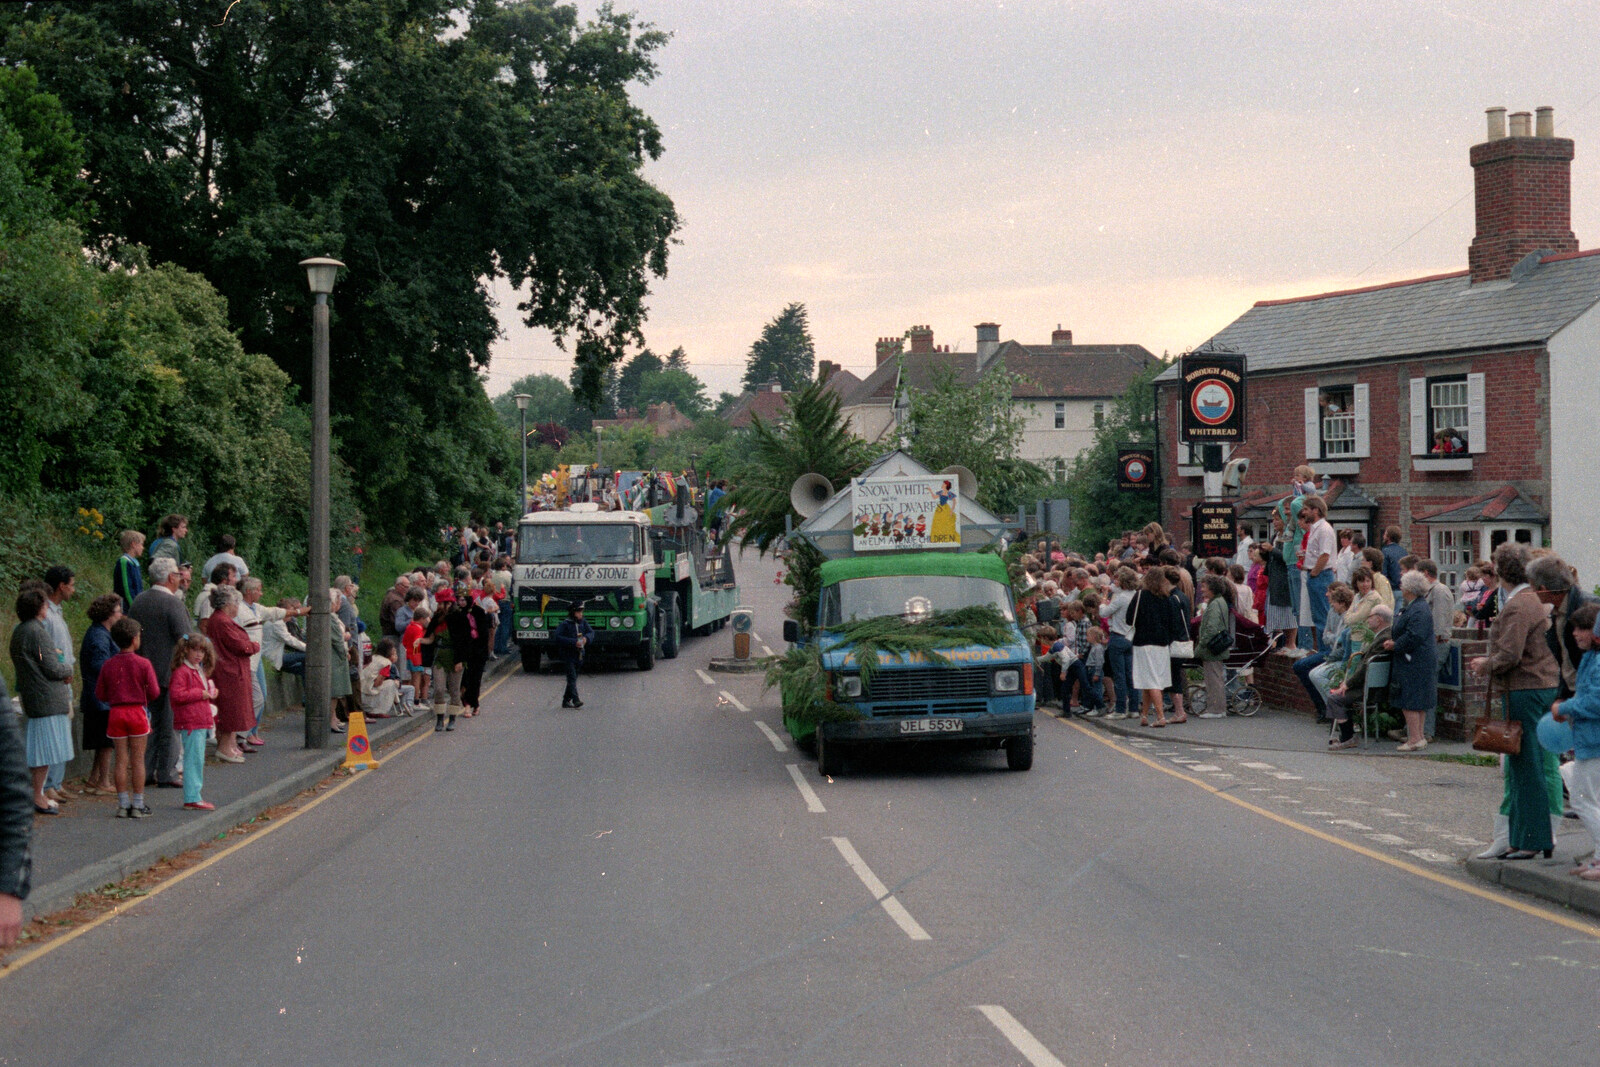 The McCarthy and Stone lorry negotiates a traffic island from The Lymington Carnival, Hampshire - 17th June 1985